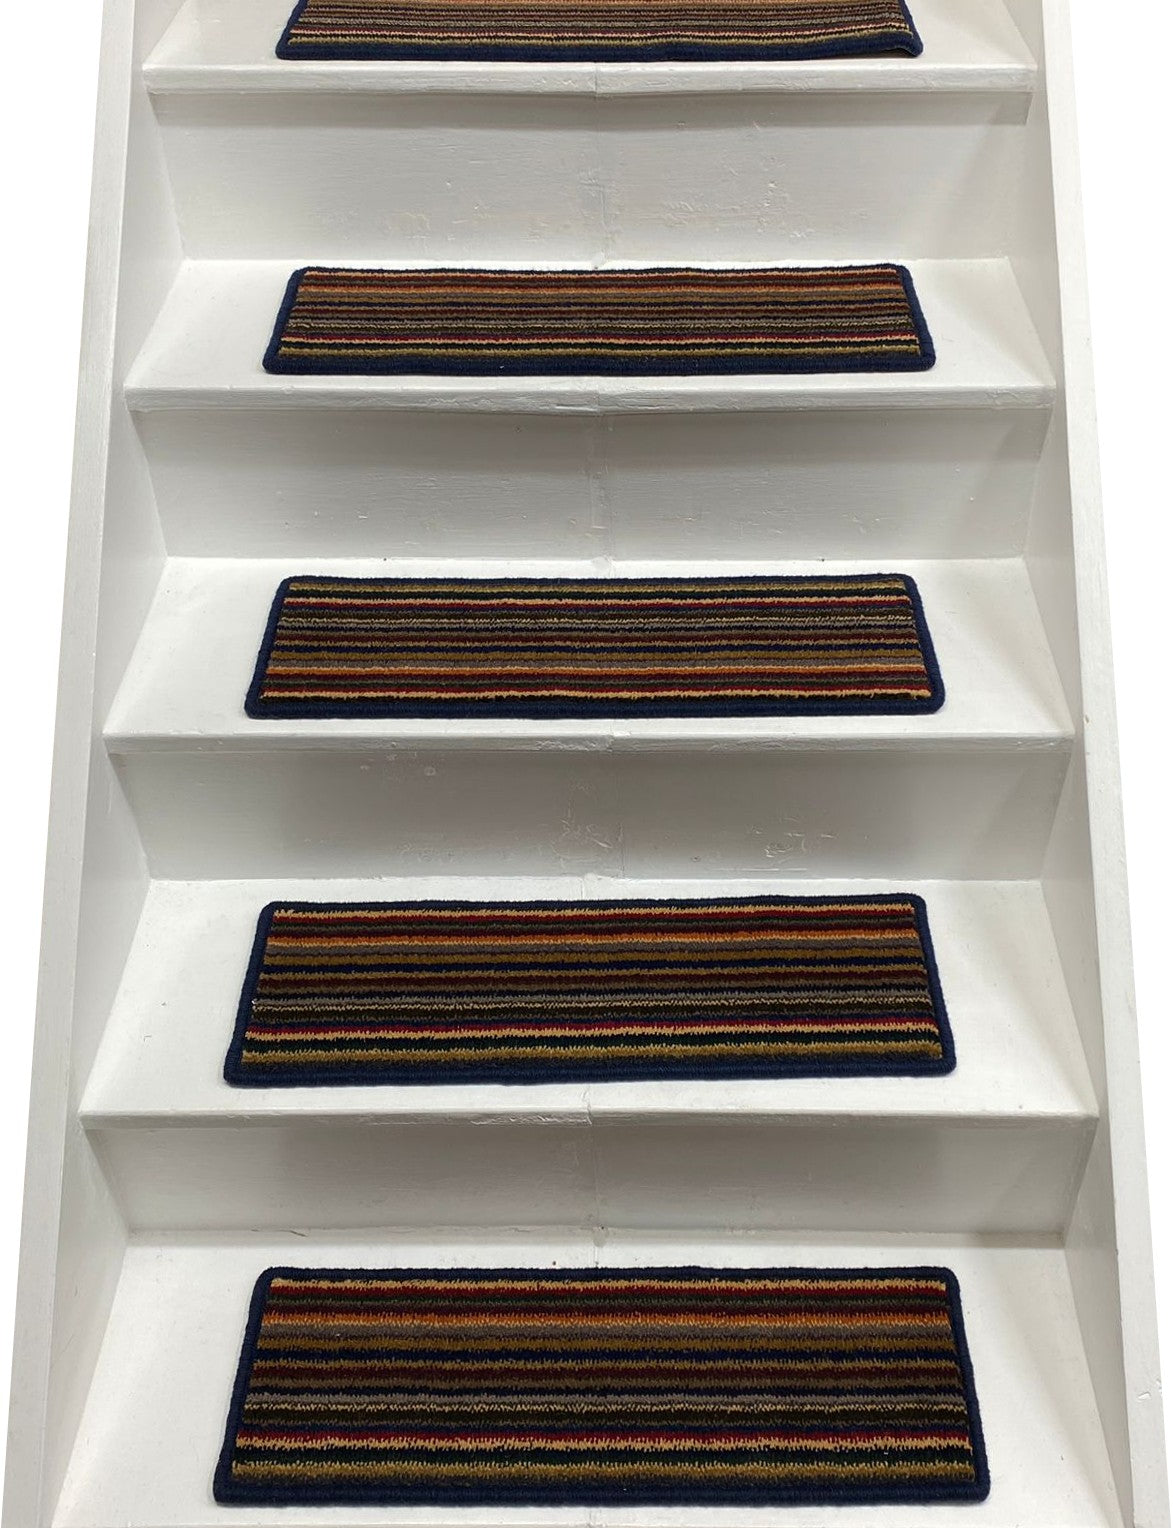 Axminster Carpets Special Rectory Red Stripe Stair Pads x 12 with Free Delivery